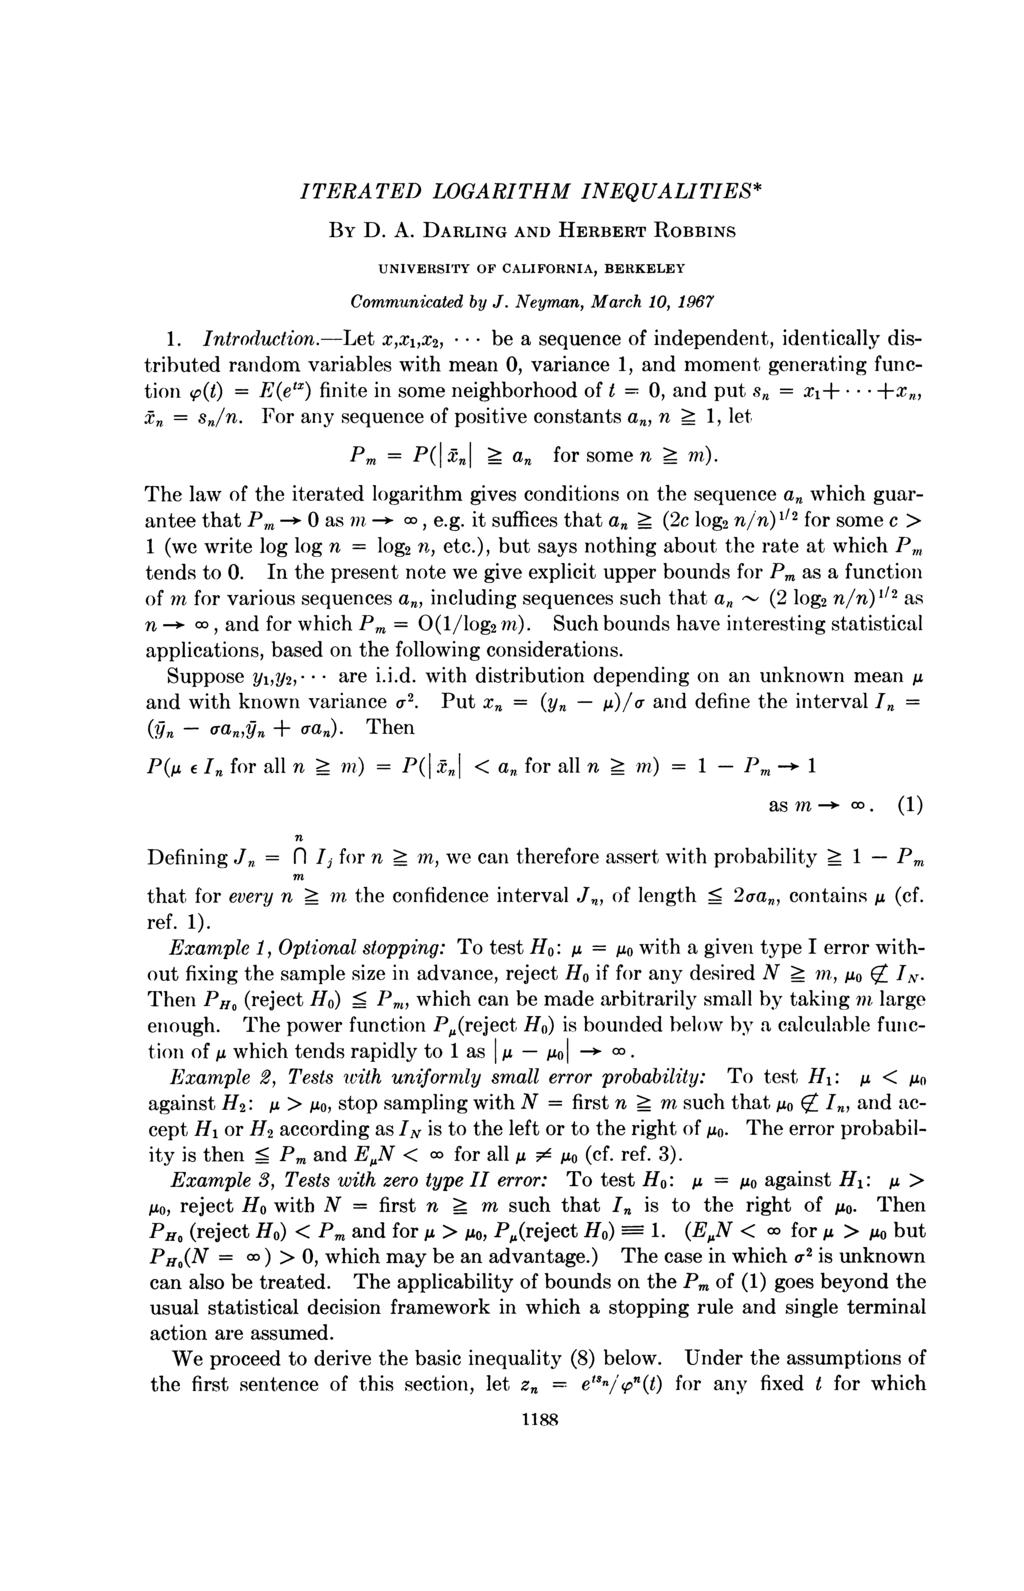 ITERATED LOGARITHM INEQUALITIES* By D. A. DARLING AND HERBERT ROBBINS UNIVERSITY OF CALIFORNIA, BERKELEY Communicated by J. Neyman, March 10, 1967 1. Introduction.-Let x,x1,x2,.